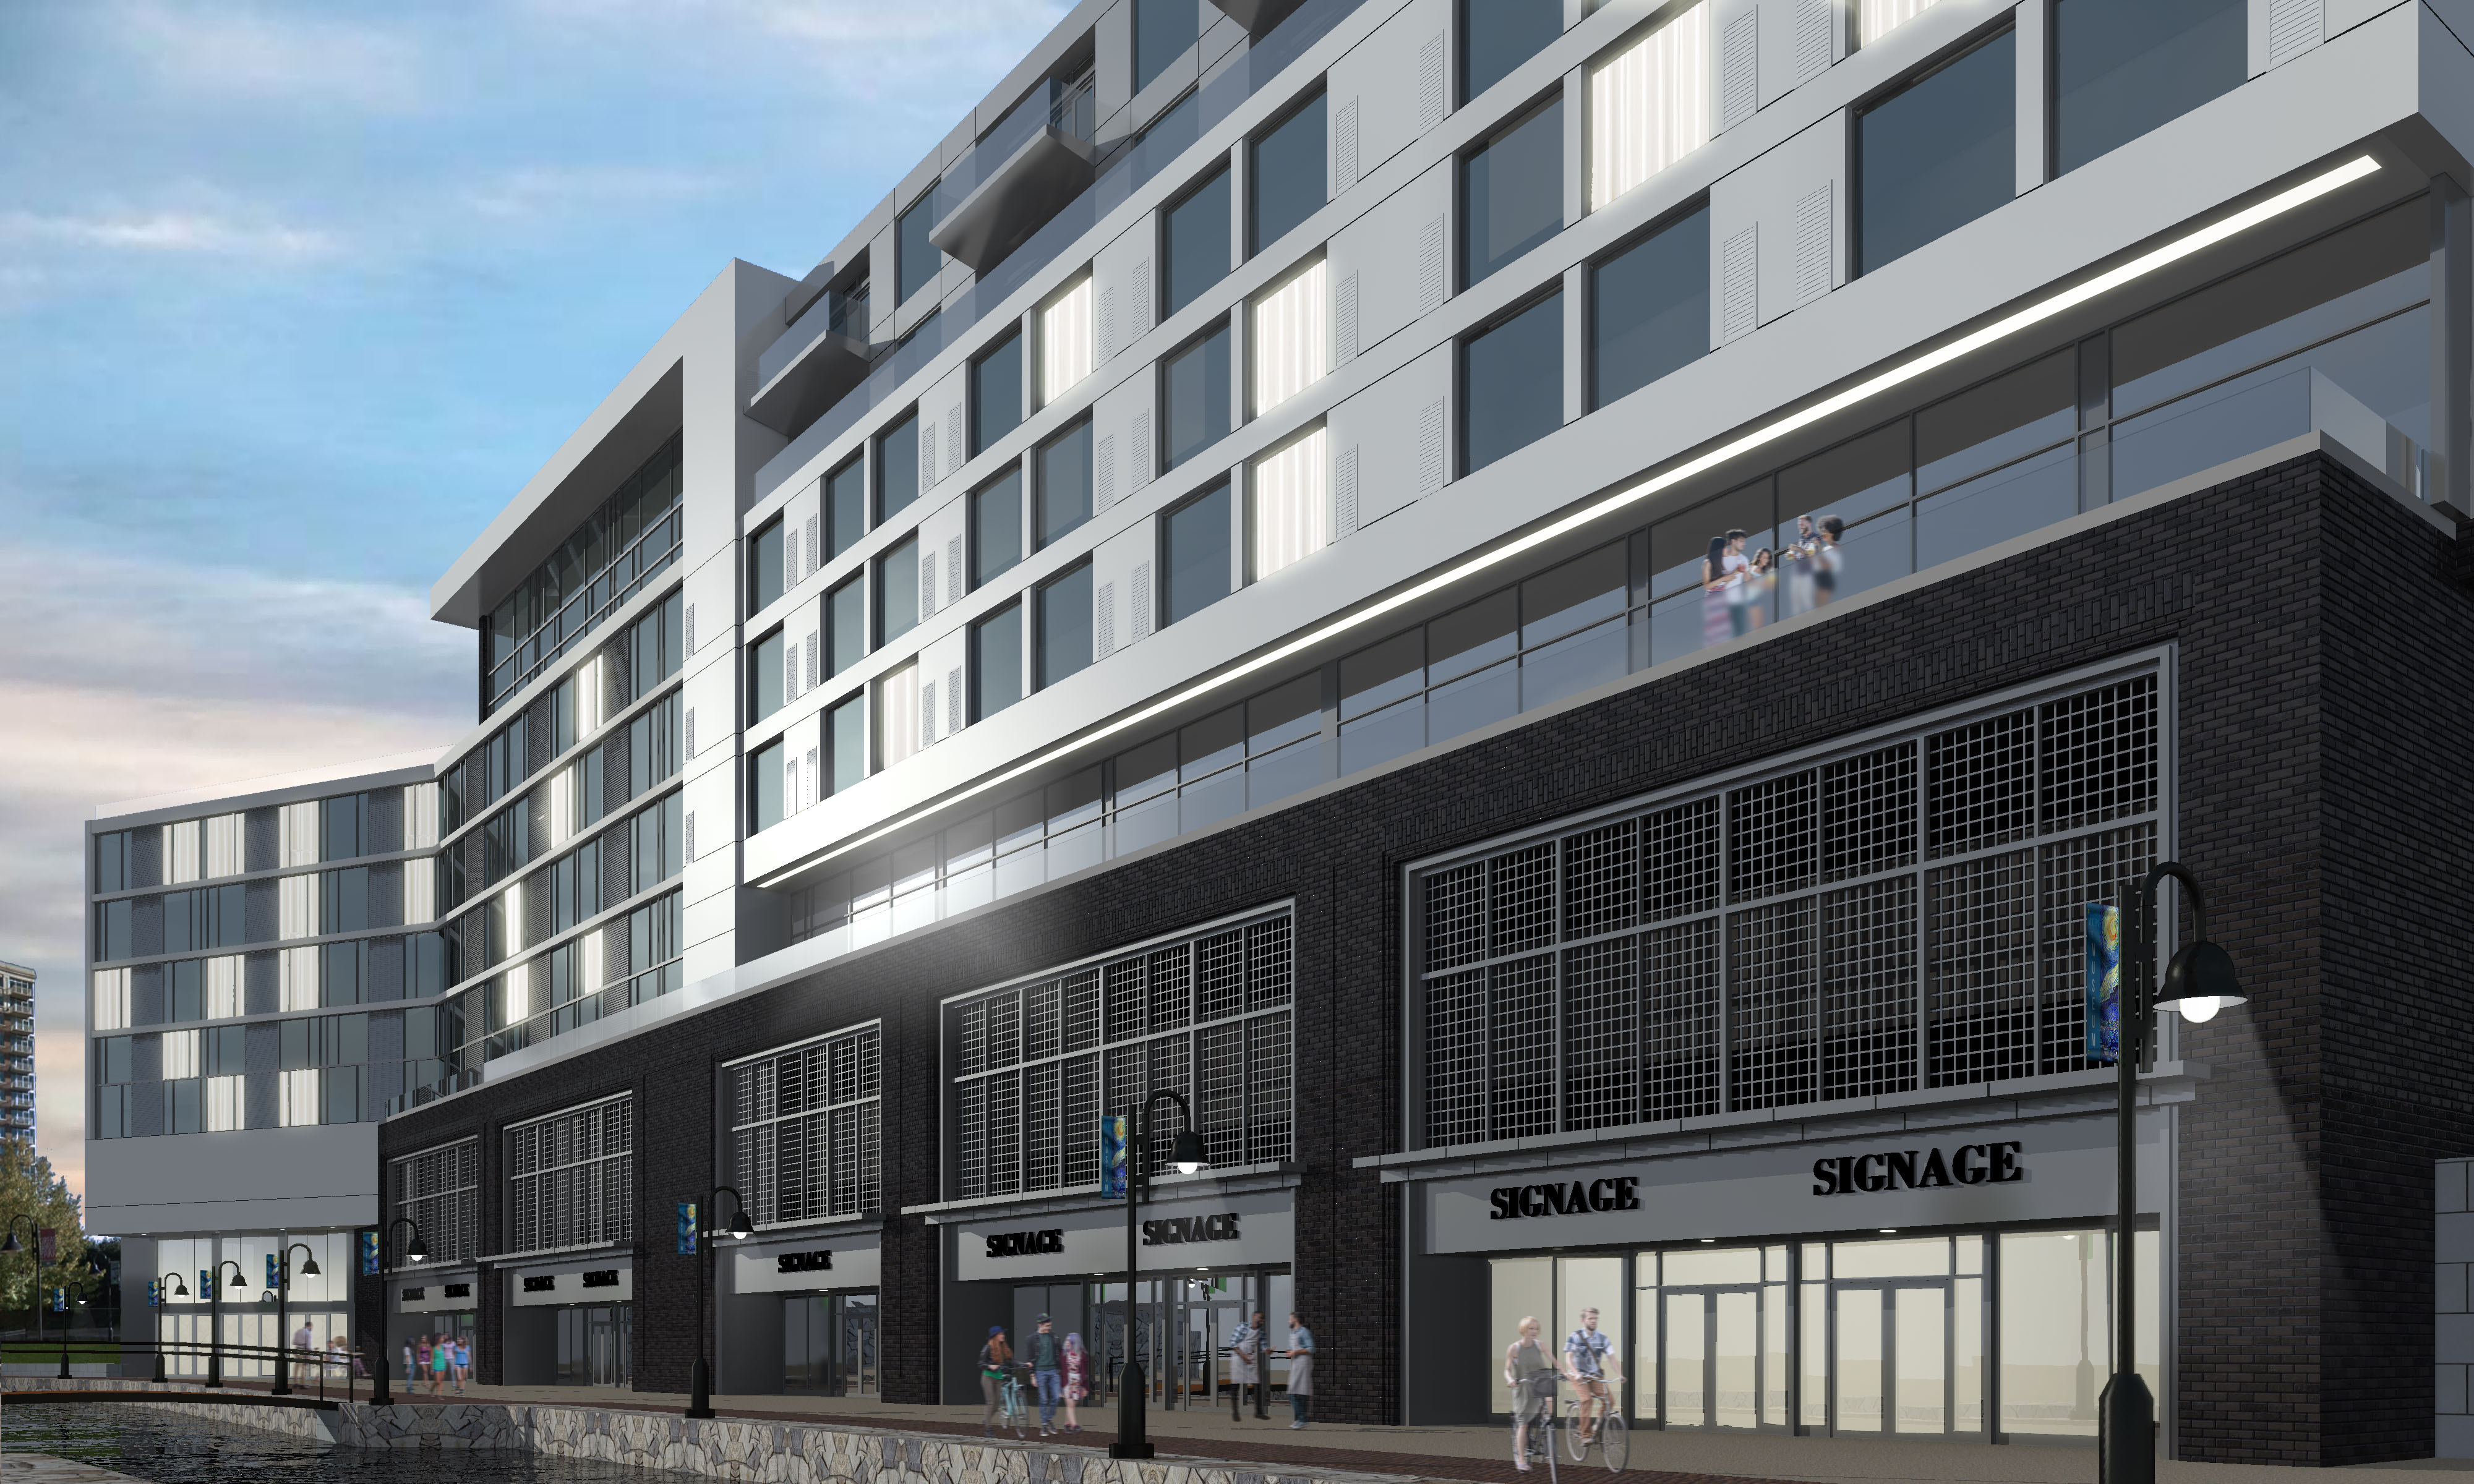 Richmond’s first AC hotel to be designed by nbj Architecture.